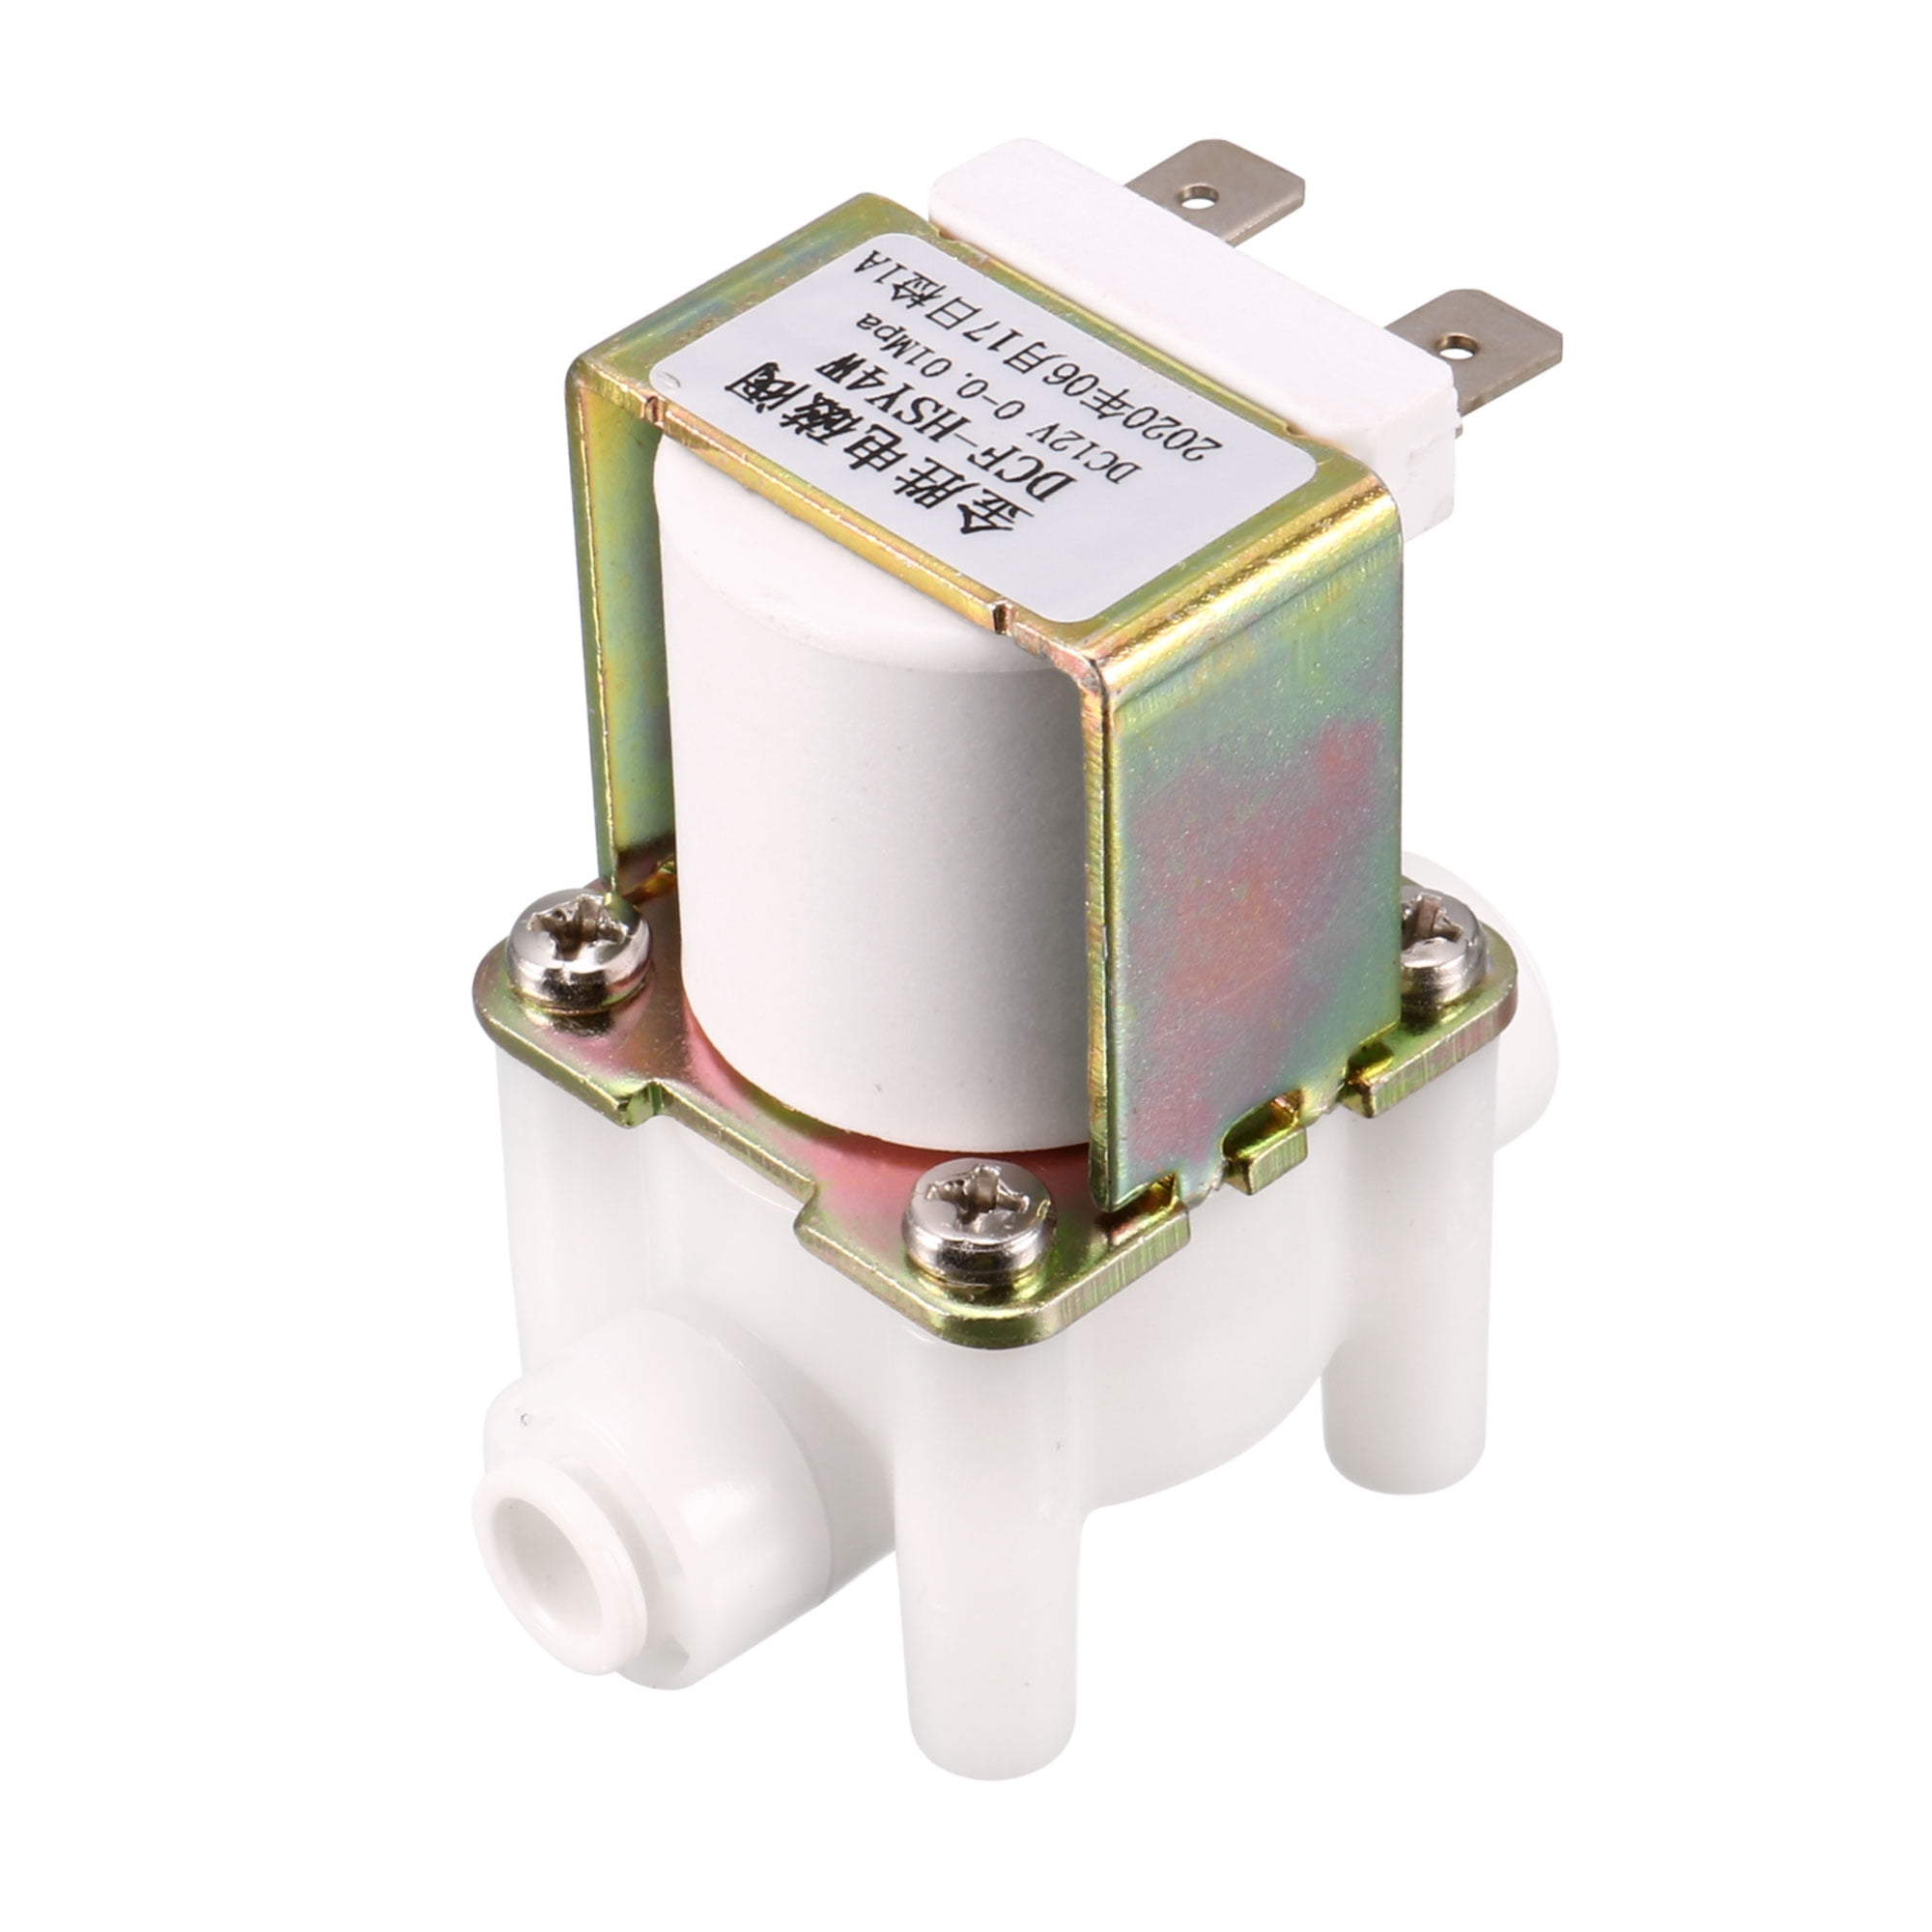 110V Preamer Normally Closed Electric Solenoid Valve for Water Air N/C 110V 12v DC 1/2 Thread 1/2 